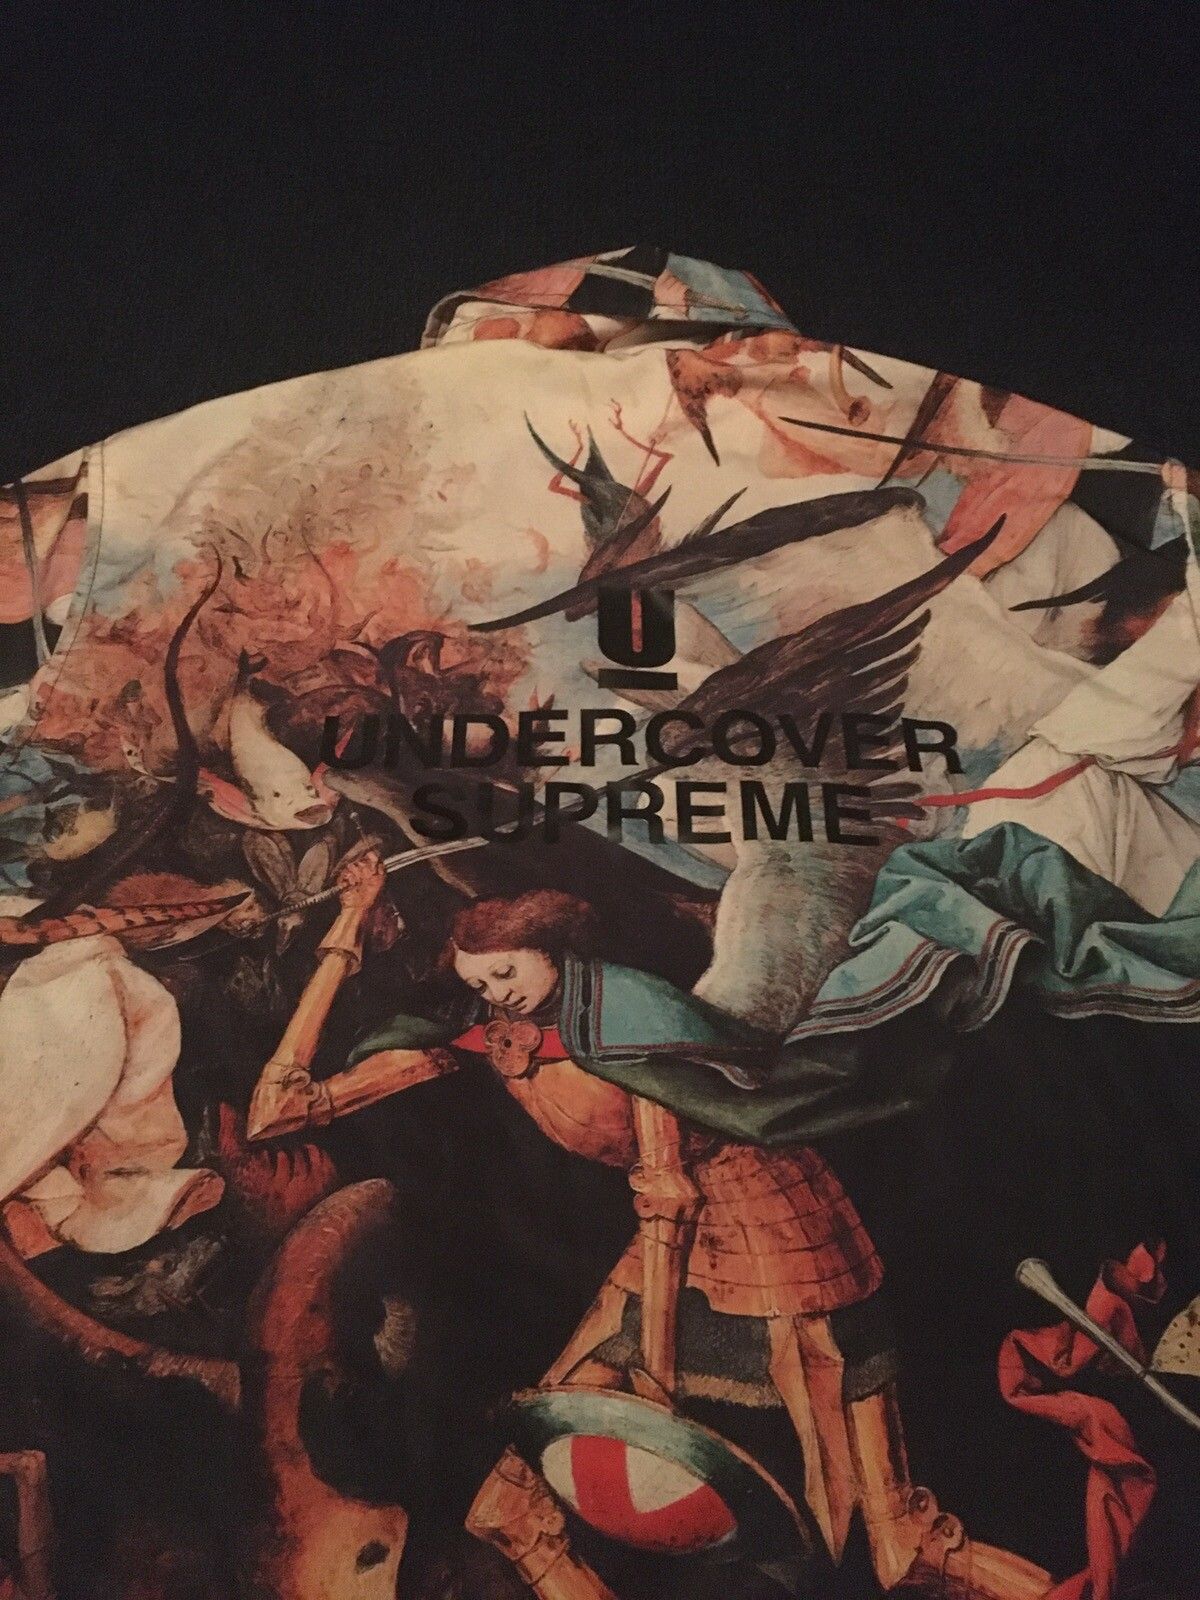 Supreme Supreme Undercover Fall of the Rebel Angels Coaches Jacket Size US L / EU 52-54 / 3 - 3 Thumbnail